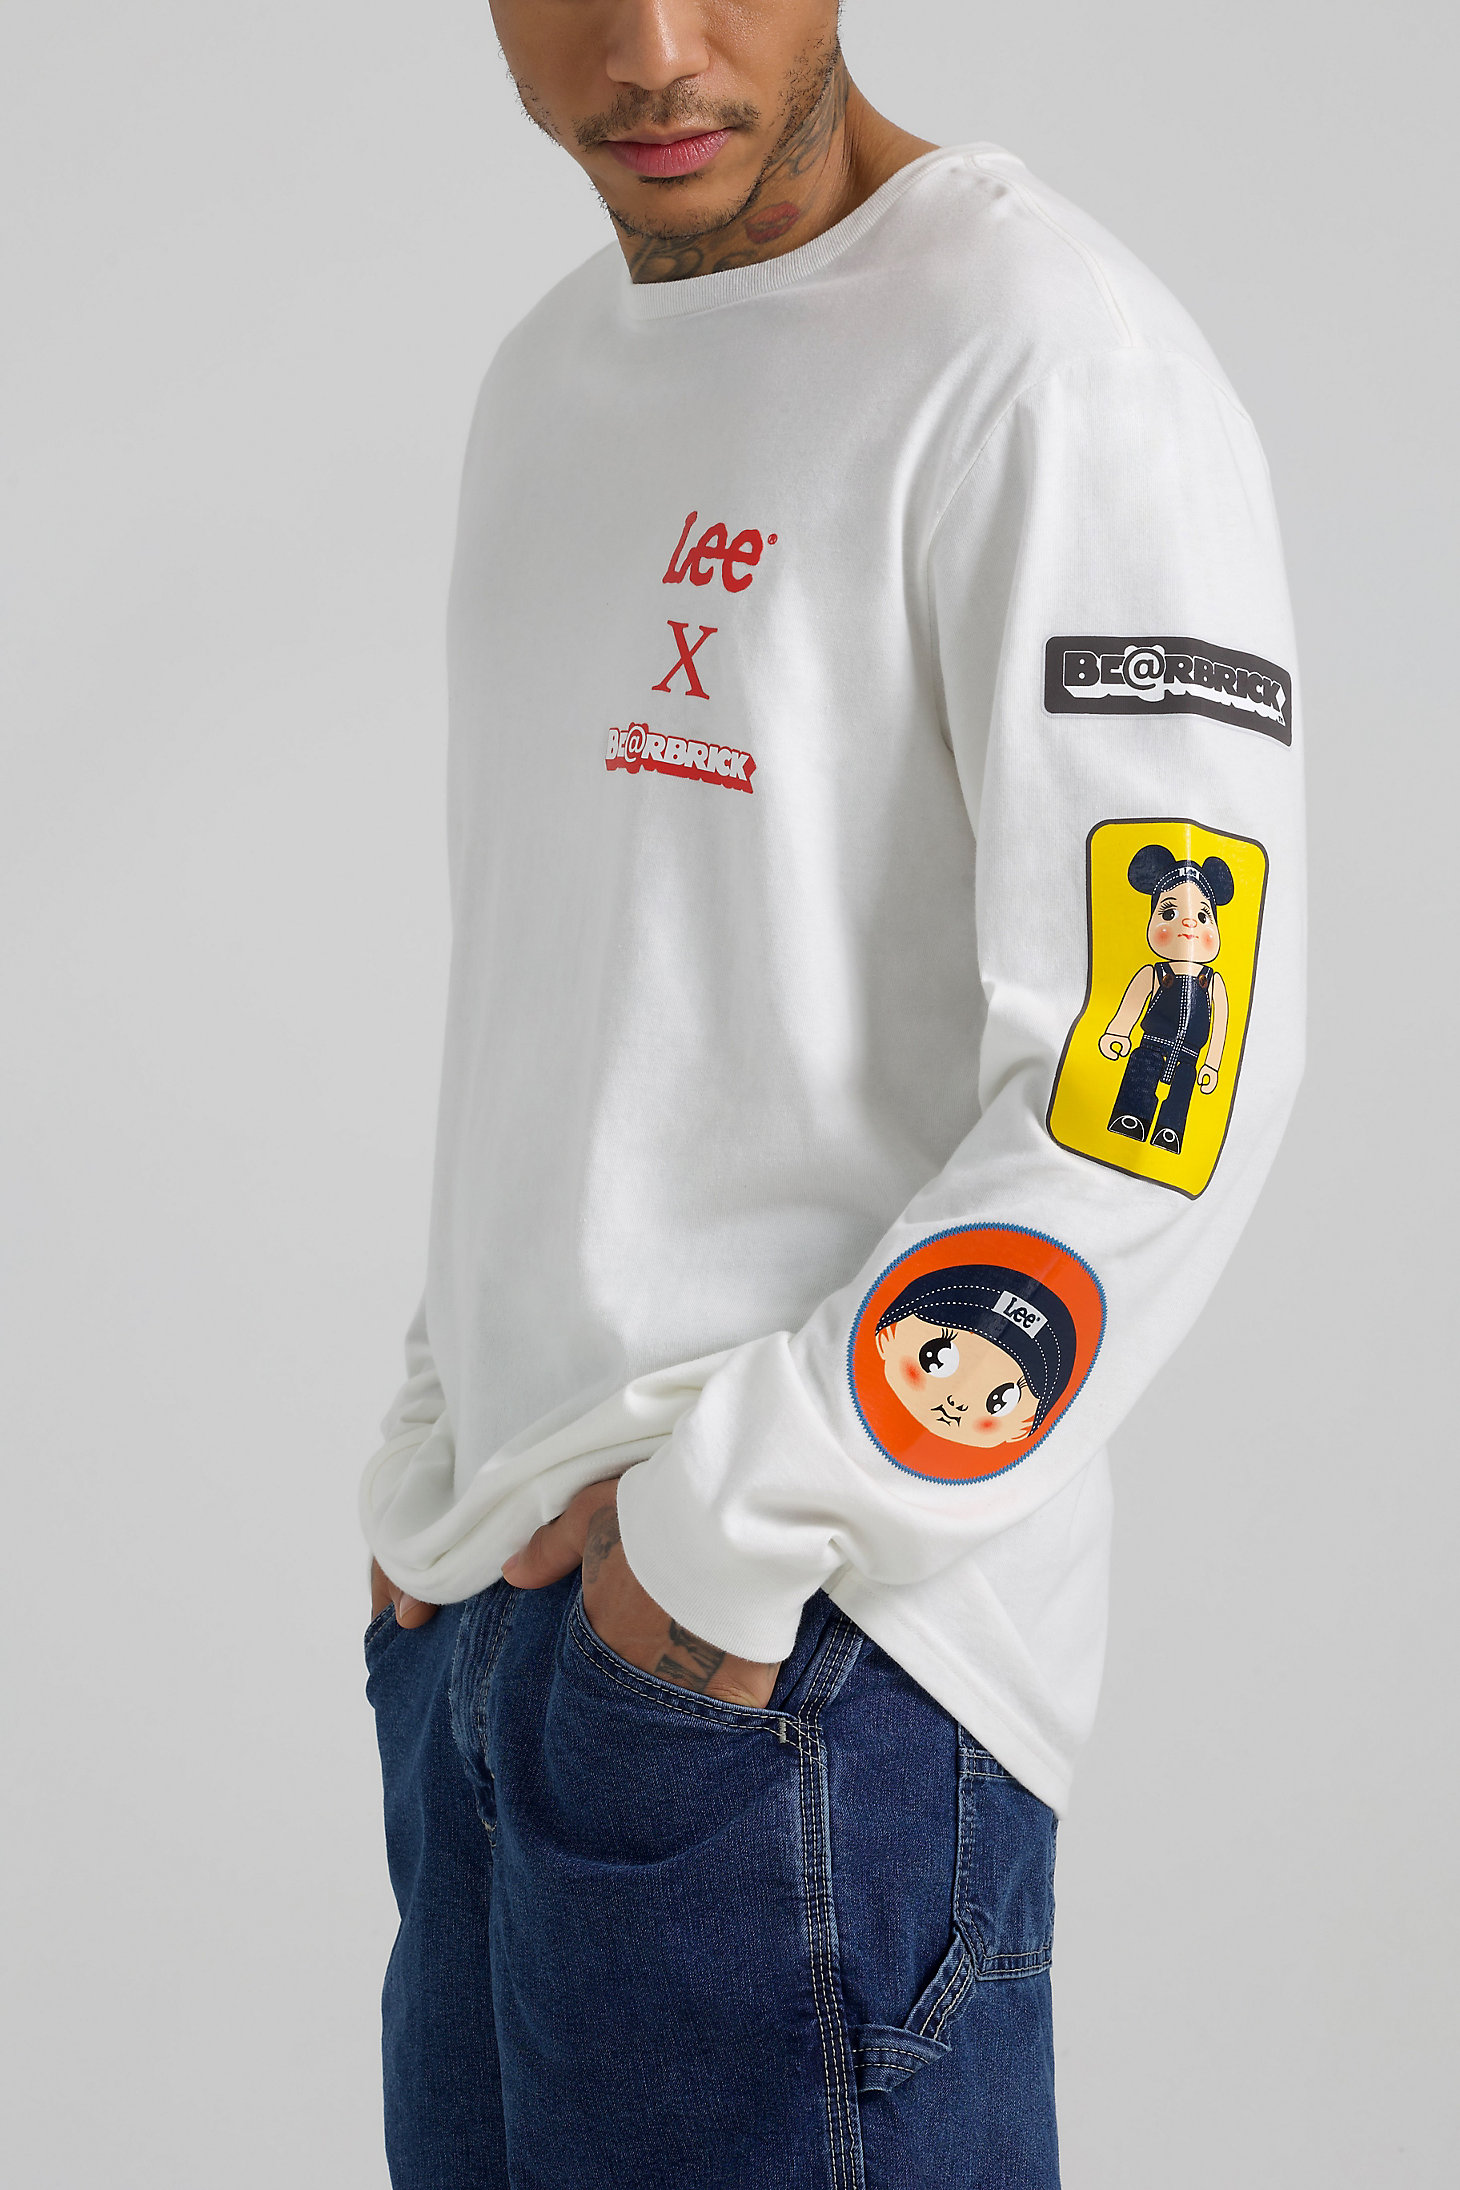 Men’s Lee x BE@RBRICK Relaxed Fit Long Sleeve Tee in Marshmallow alternative view 2